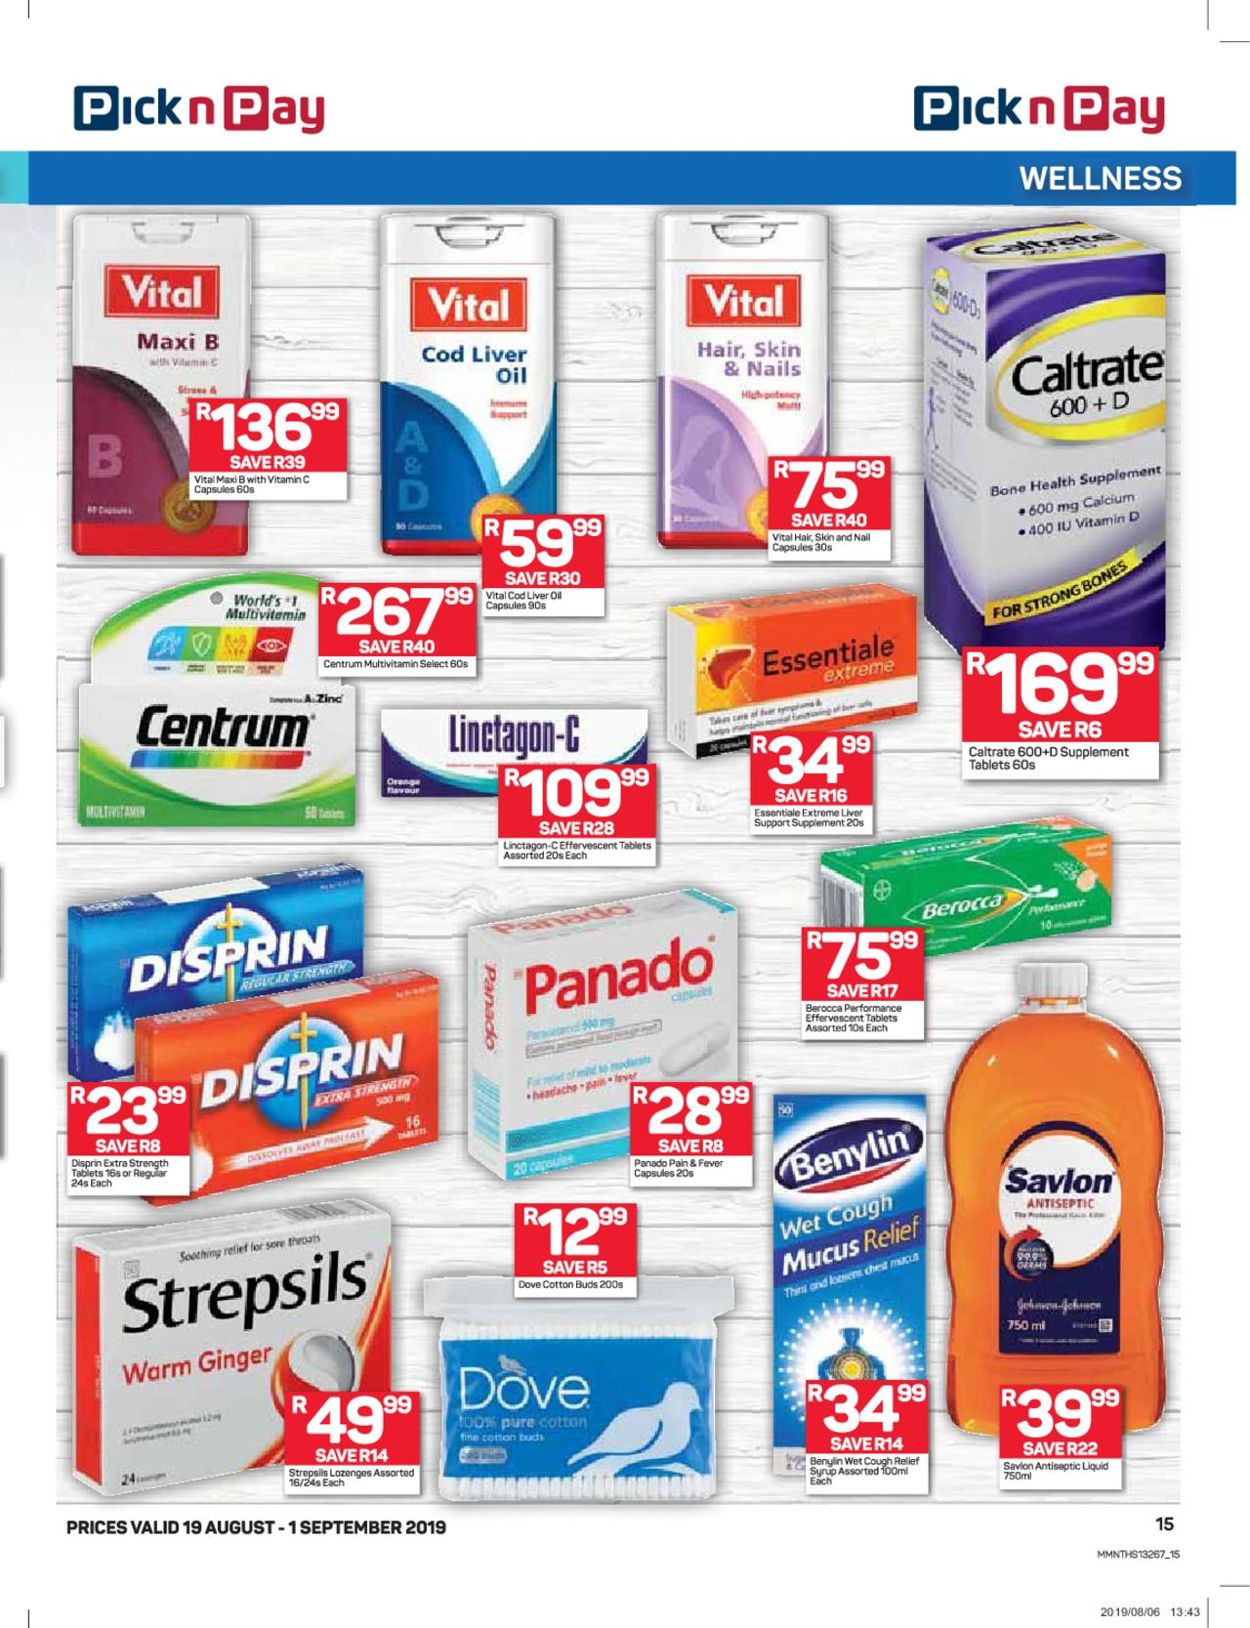 Pick n Pay Catalogue - 2019/08/19-2019/09/01 (Page 9)